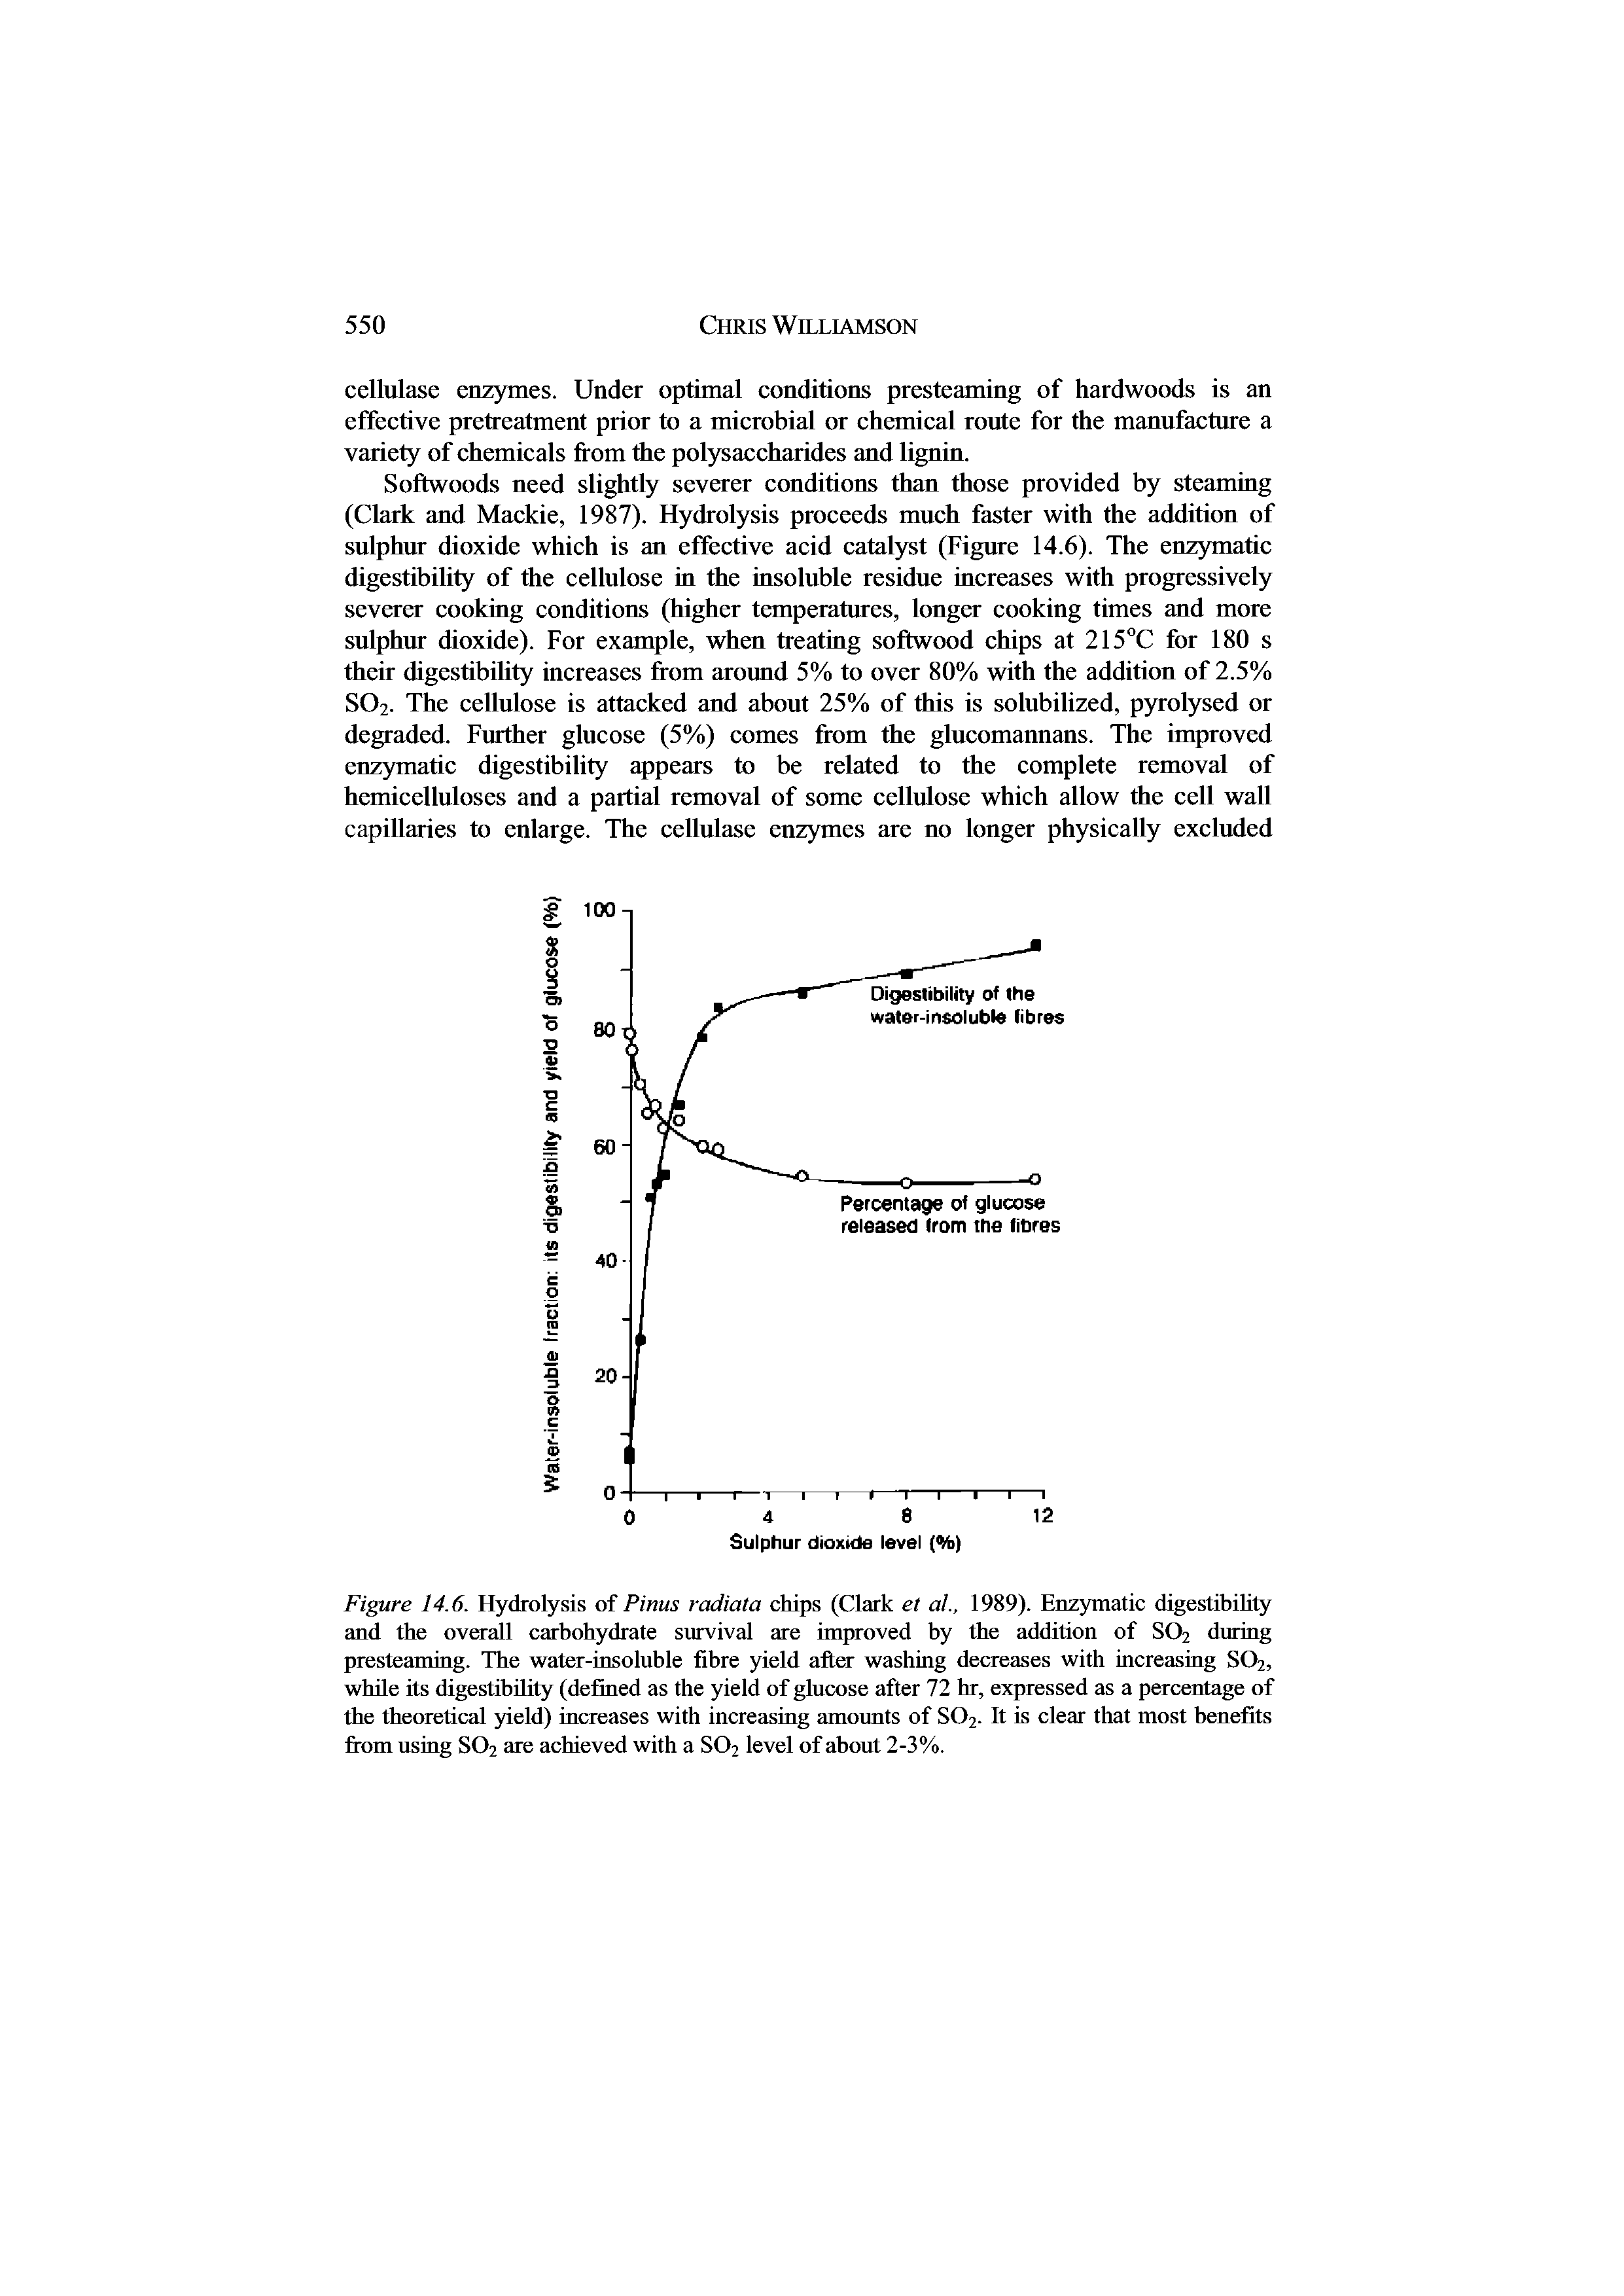 Figure 14.6. Hydrolysis of Pinus radiata chips (Clark et al., 1989). Enz)Tnatic digestibihty and the overall carbohydrate survival are improved by the addition of SO2 during presteaming. The water-insoluble fibre yield after washing decreases with increasing SO2, while its digestibility (defined as the yield of glucose after 72 hr, expressed as a percentage of the theoretical yield) increases with increasing amounts of SO2. ft is clear that most benefits from using SO2 are achieved with a SO2 level of about 2-3%.